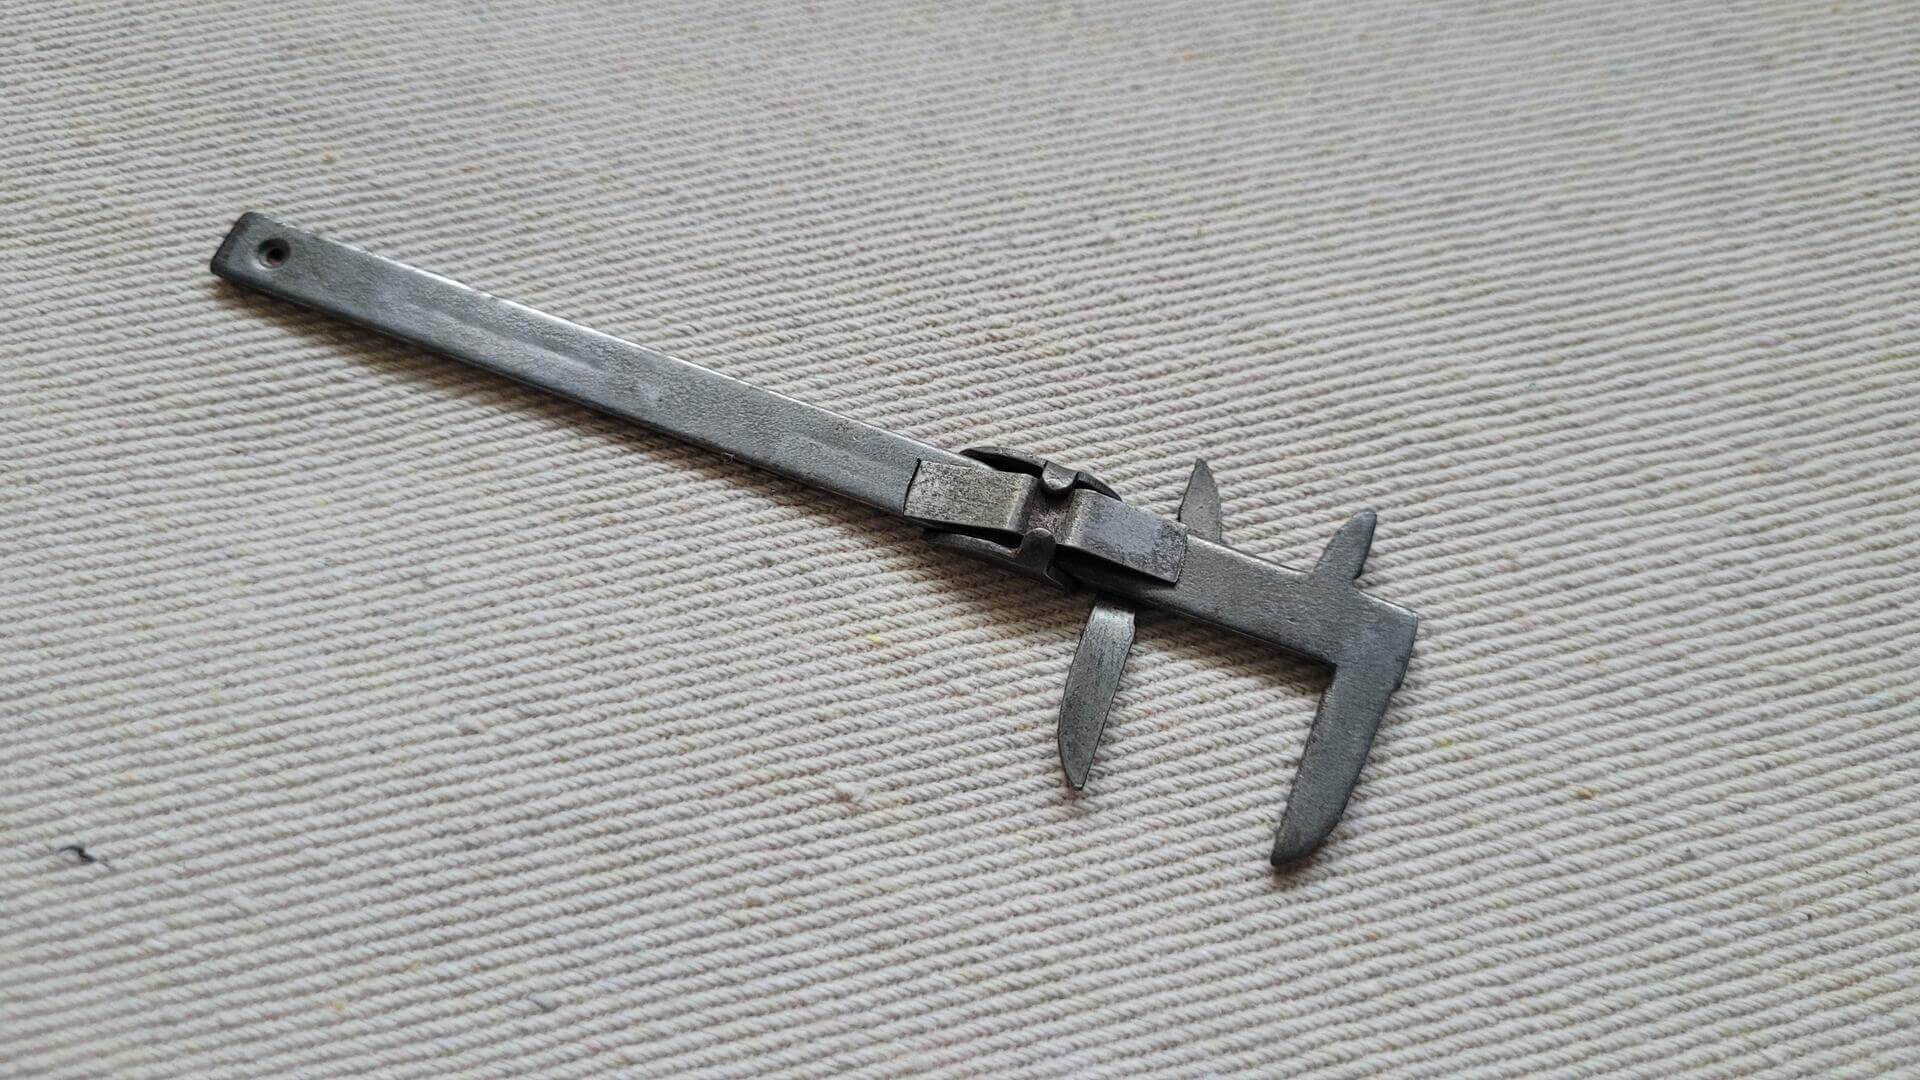 Rare Pioneer Four Inches Mini Pocket Slide Caliper Made in USA - Machinist / Mechanic Marking and Measuring Vintage Collectible Tools